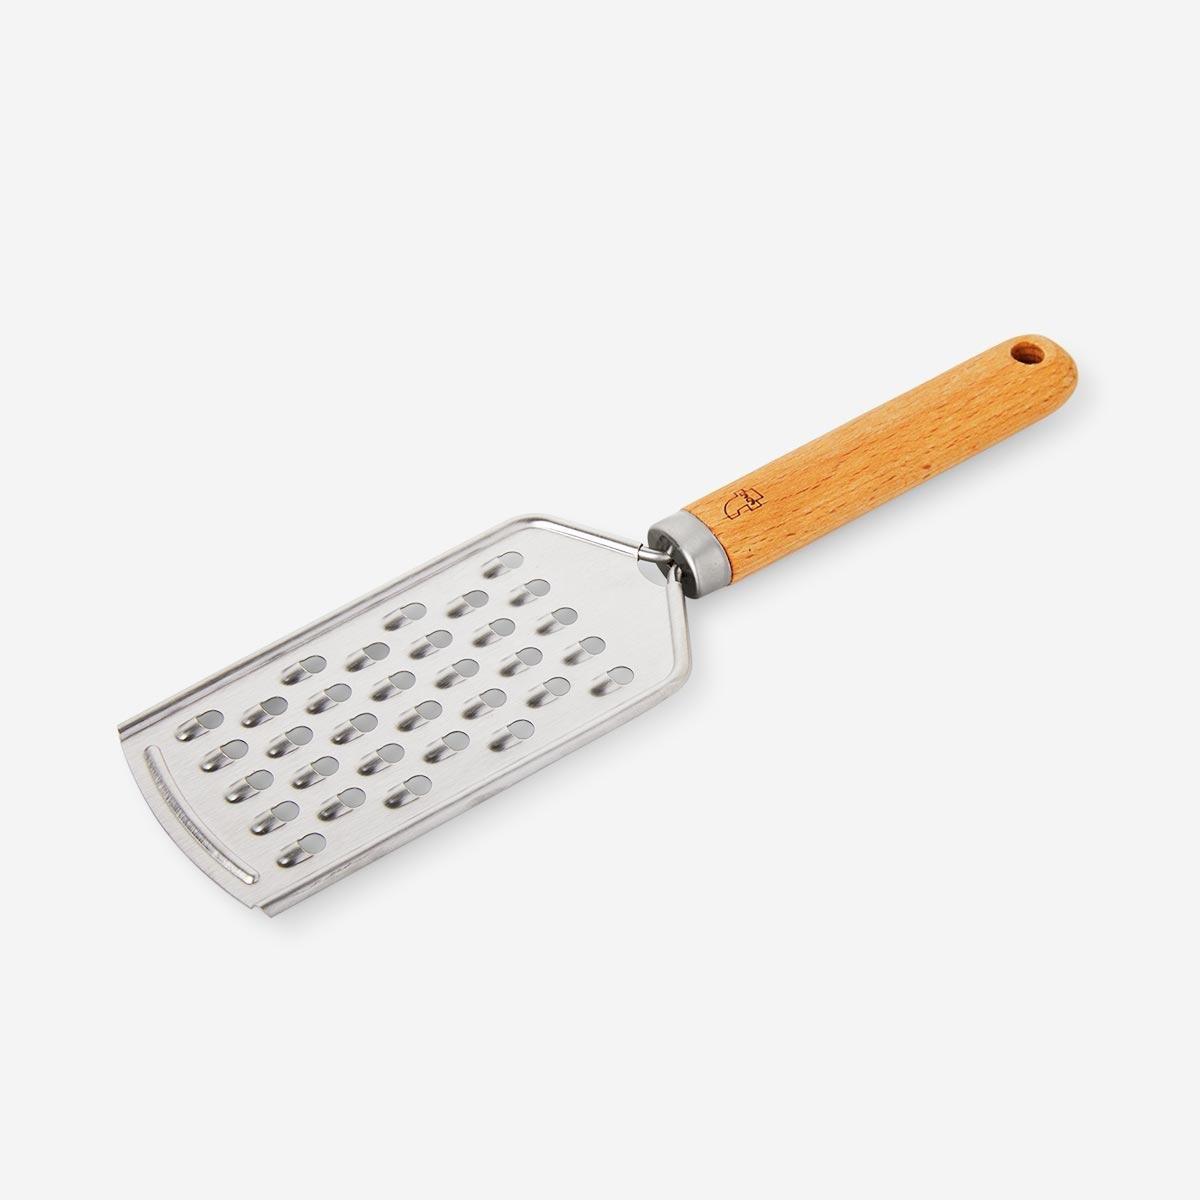 Stainless steel coarse grater.